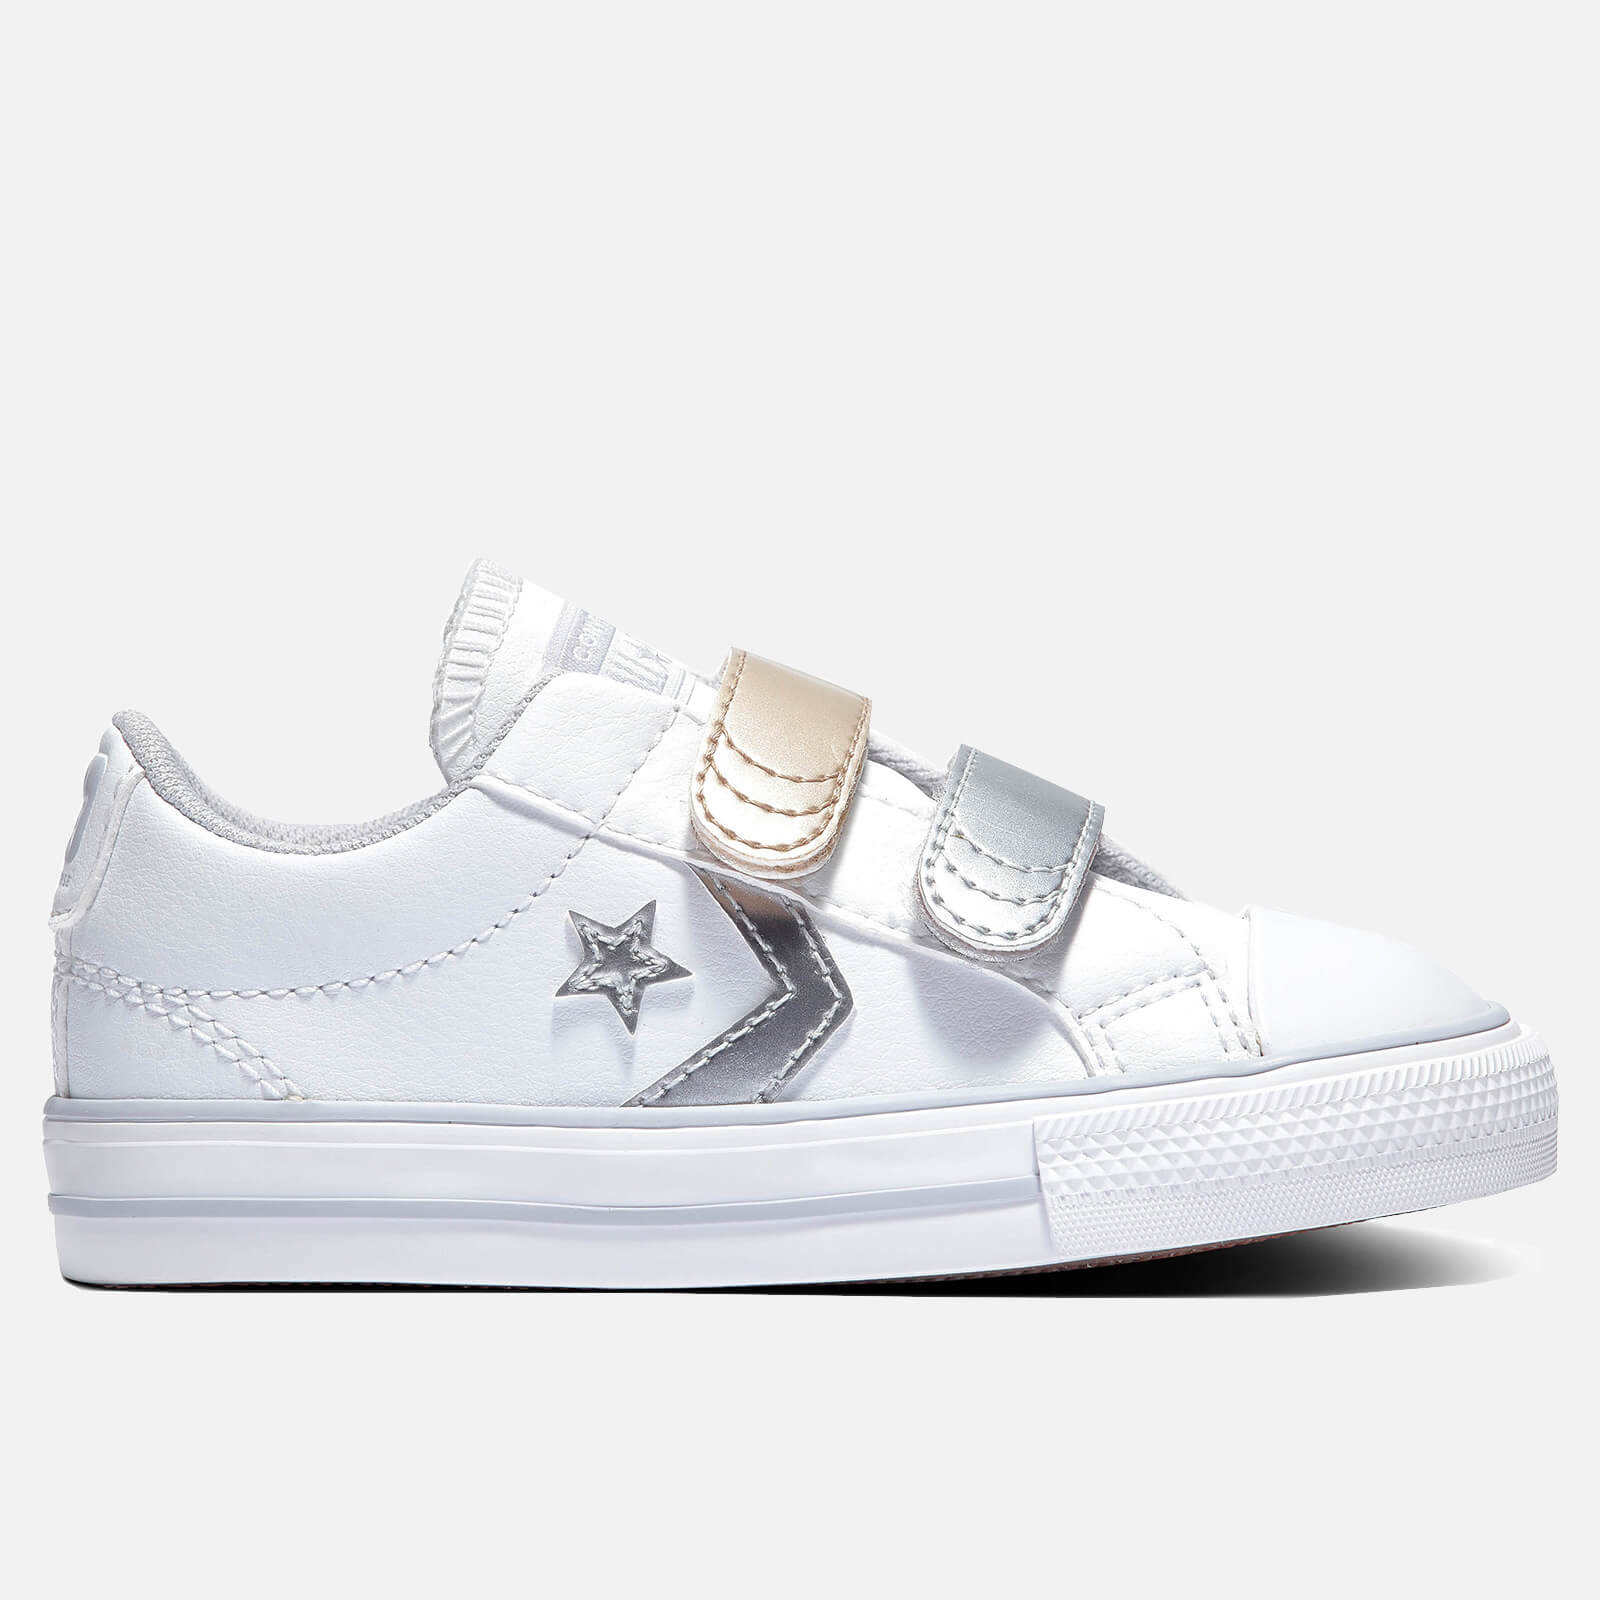 Converse Toddlers' Star Player Ox Metallic Velcro Trainers - White - UK 4 Baby